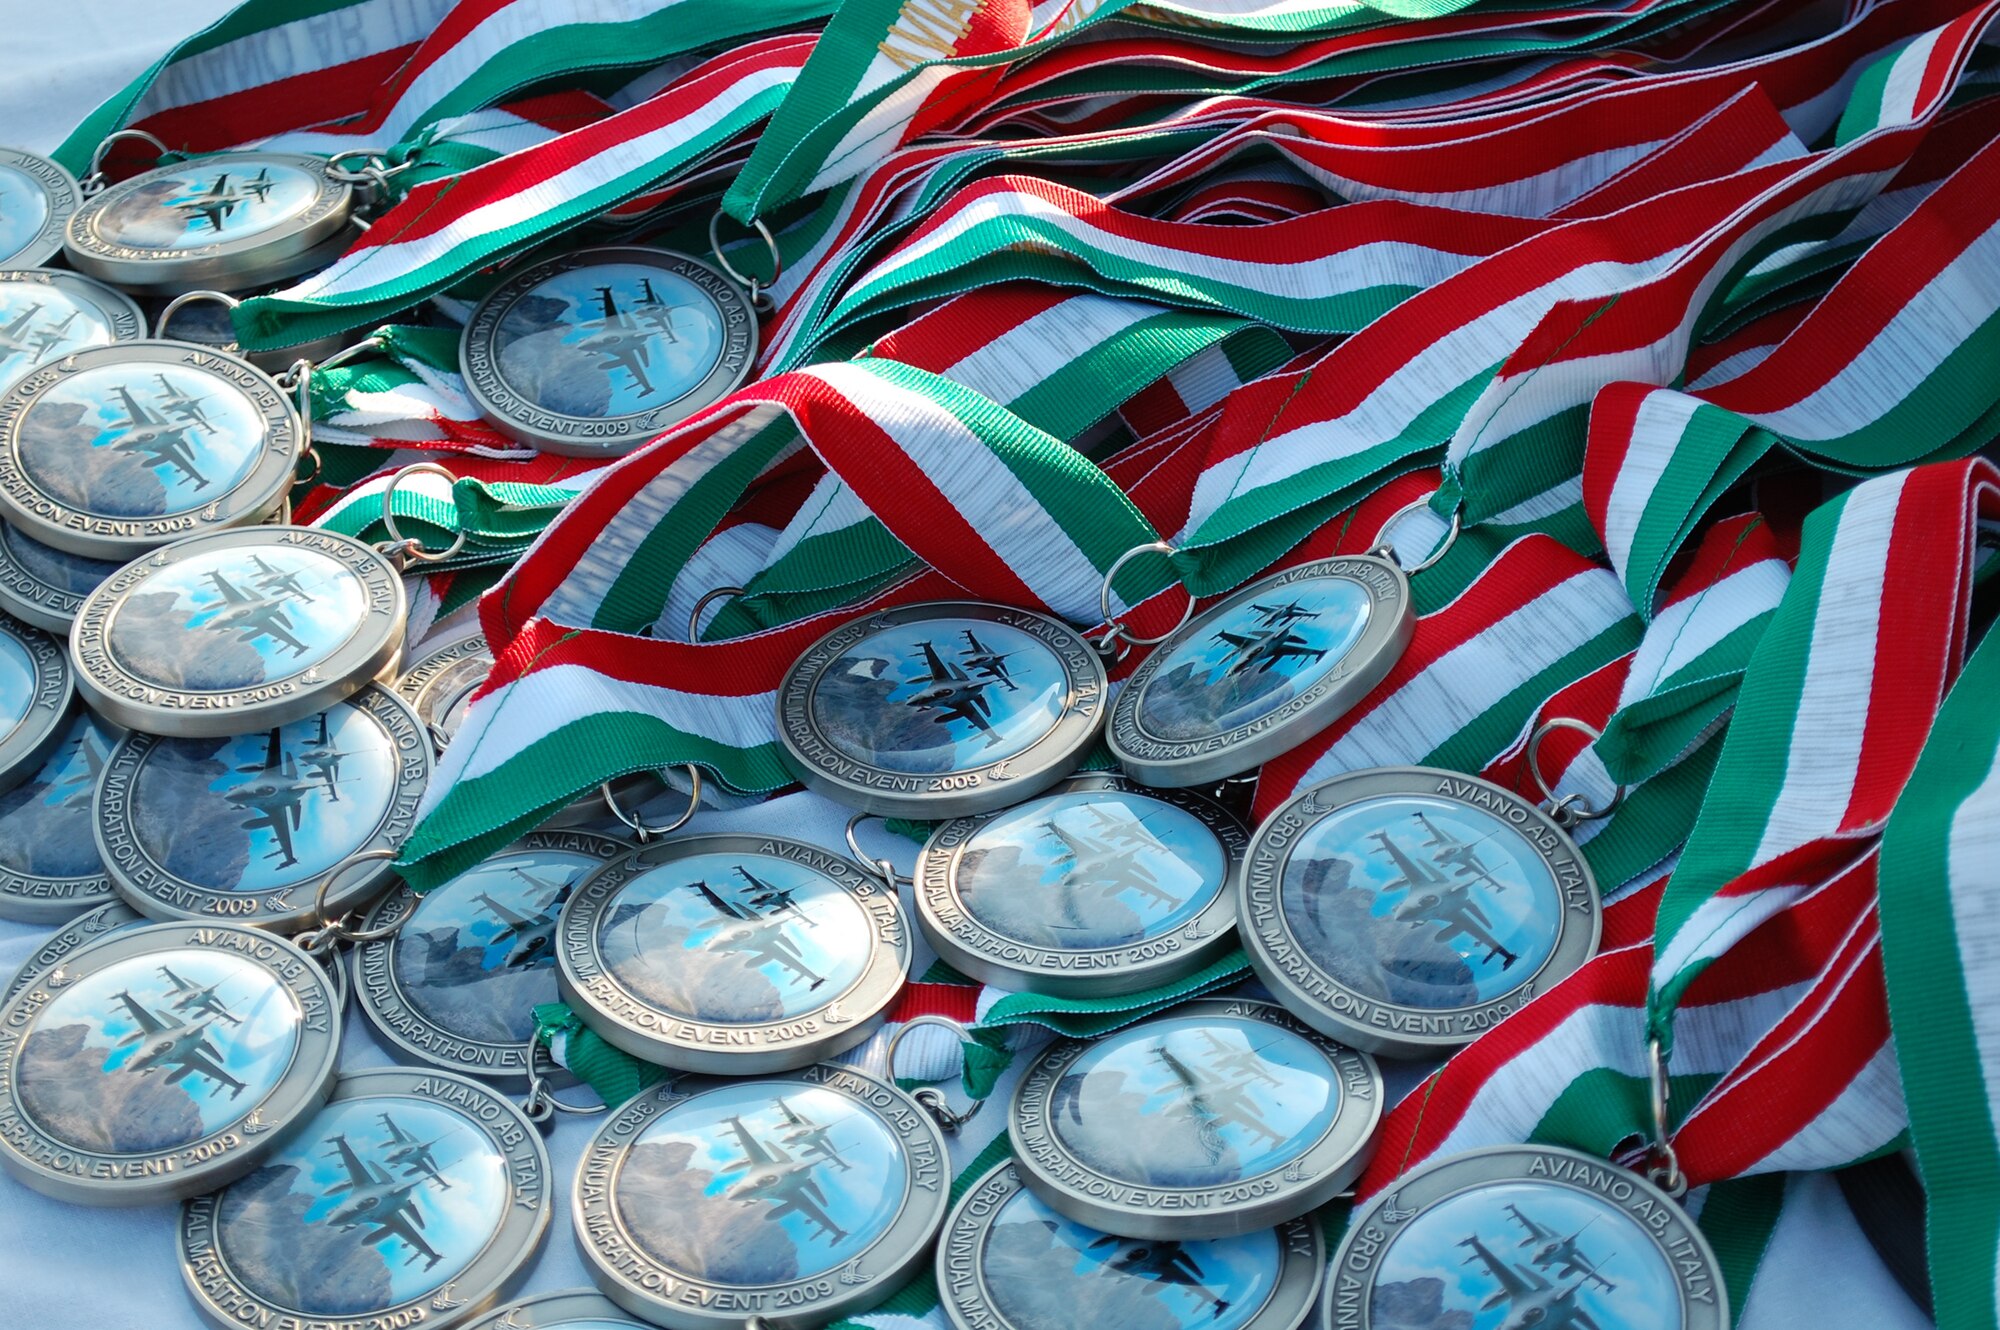 Medals were awarded to full and half marathon participants during the Third Annual Aviano Marathon Sept. 13, 2009. Nearly 1,000 Americans and Italians participated in the annual race, which ran in conjunction with a Volksmarch event, and included a full marathon, half marathon, 10K, 5K and children's one-mile fun run. (U.S. Air Force photo/Staff Sgt. Lindsey Maurice)